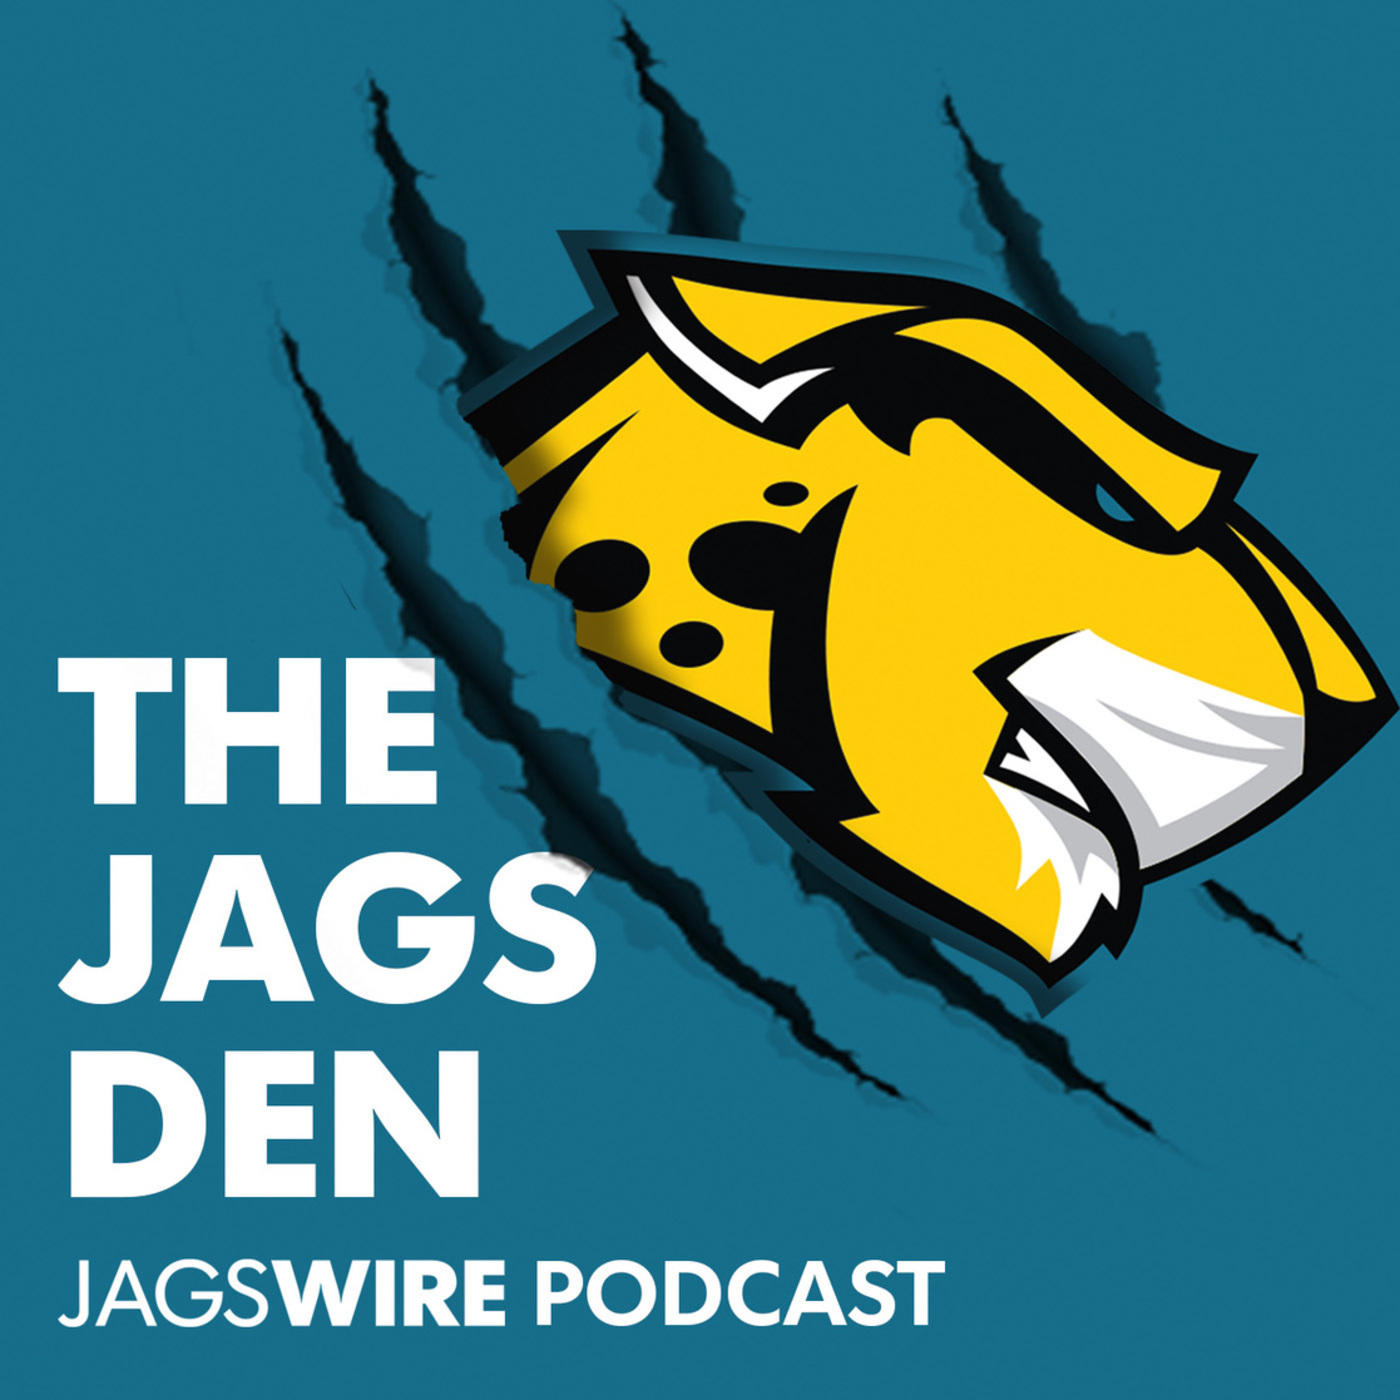 Jags Den Podcast Ep. 40: Week 2 OTA standouts, outlook on replacing Tevin Smith, social media questions